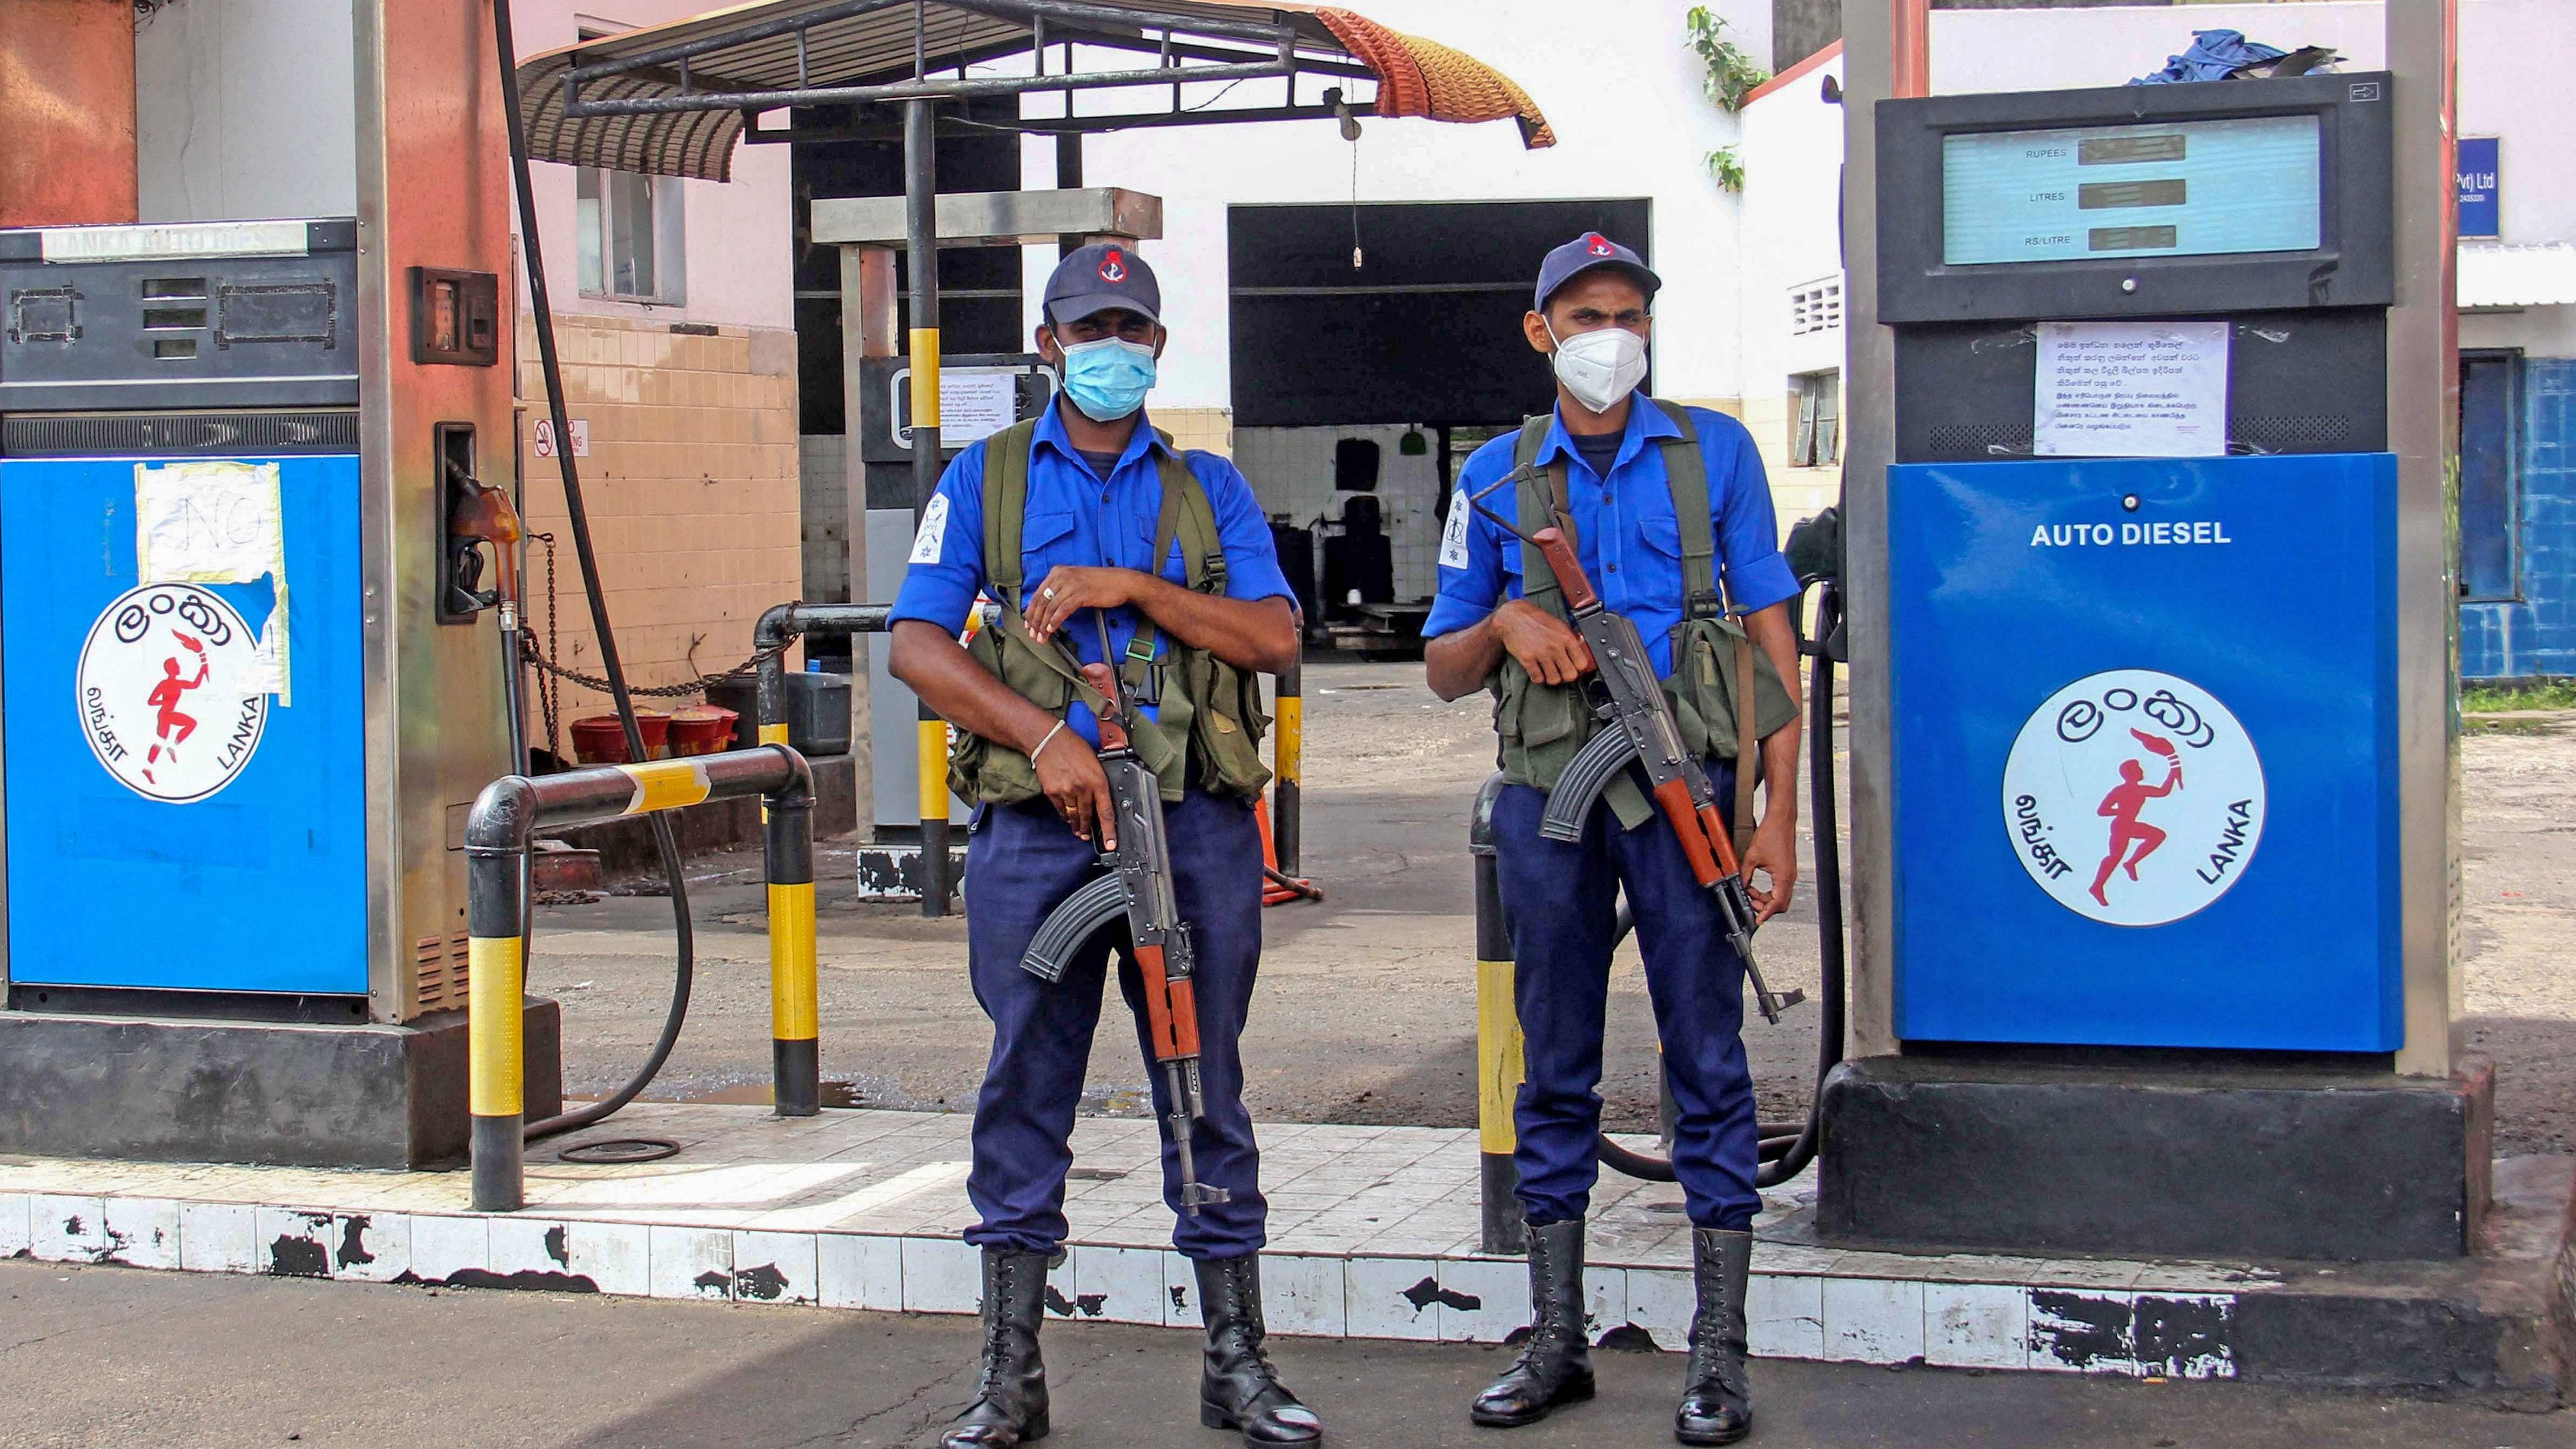 Navy officers stand guard at a closed fuel station in Colombo. Credit: AFP Photo